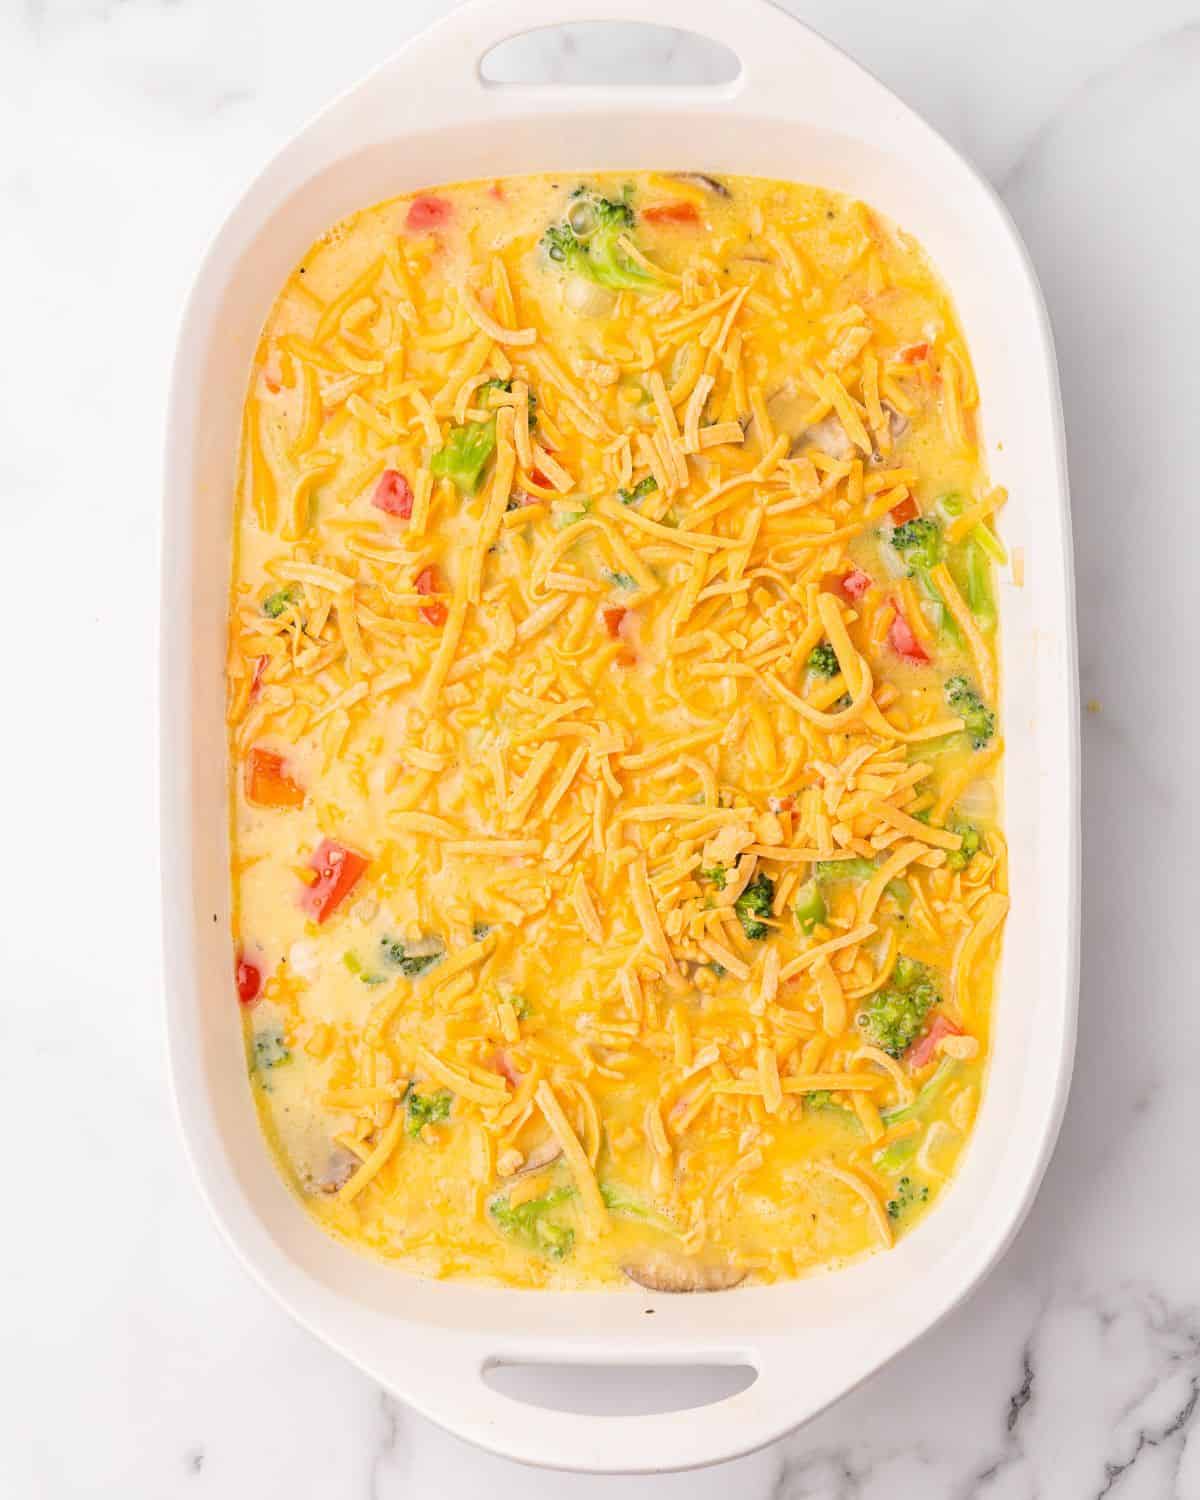 eggs and veggies mixed in a casserole dish.